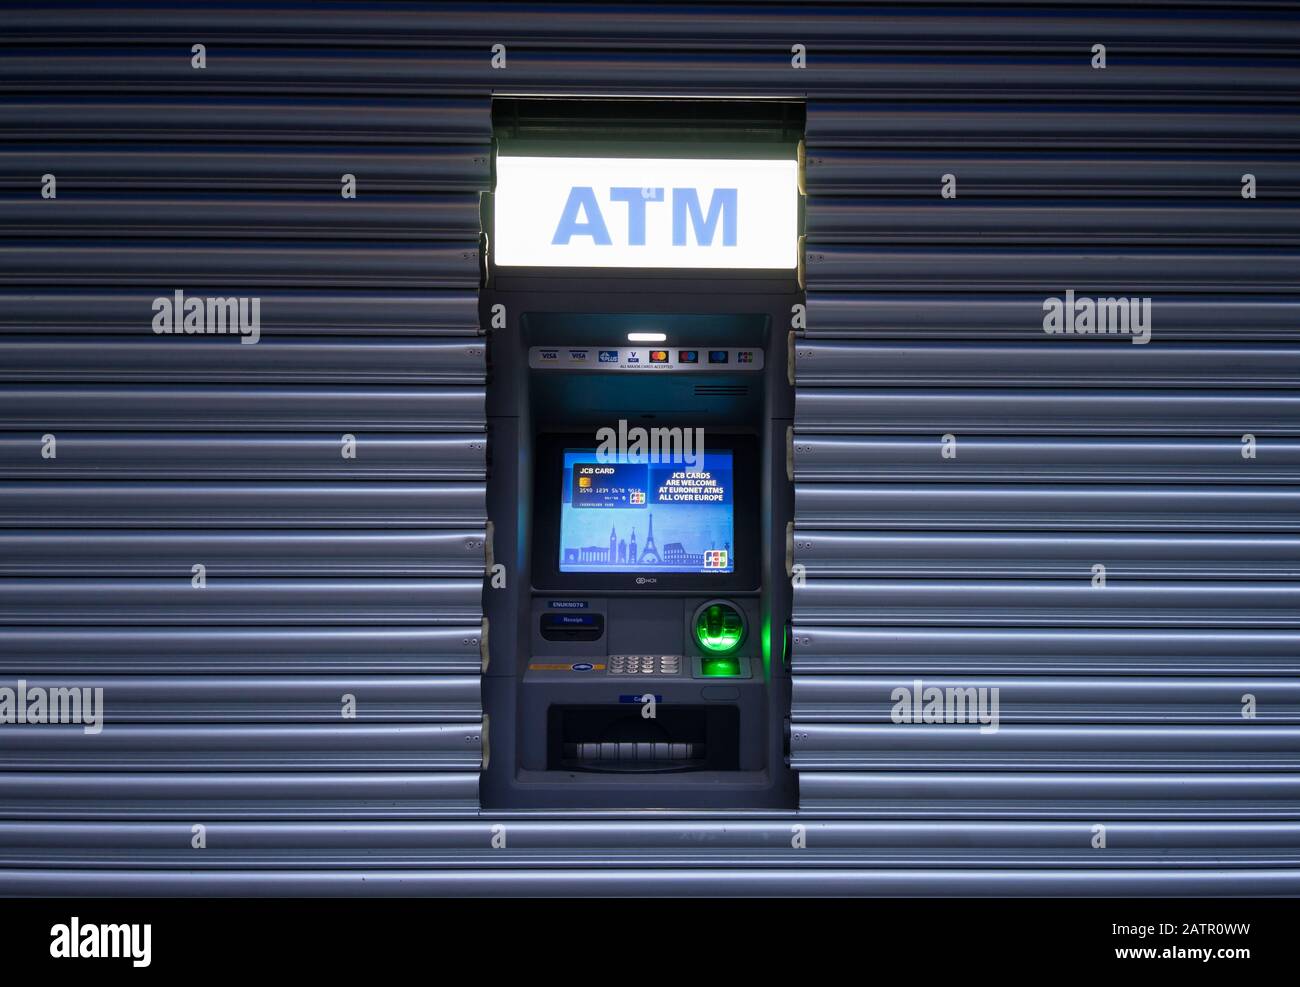 ATM Cash withdrawal machine inside the metal shutters of a shop window Stock Photo